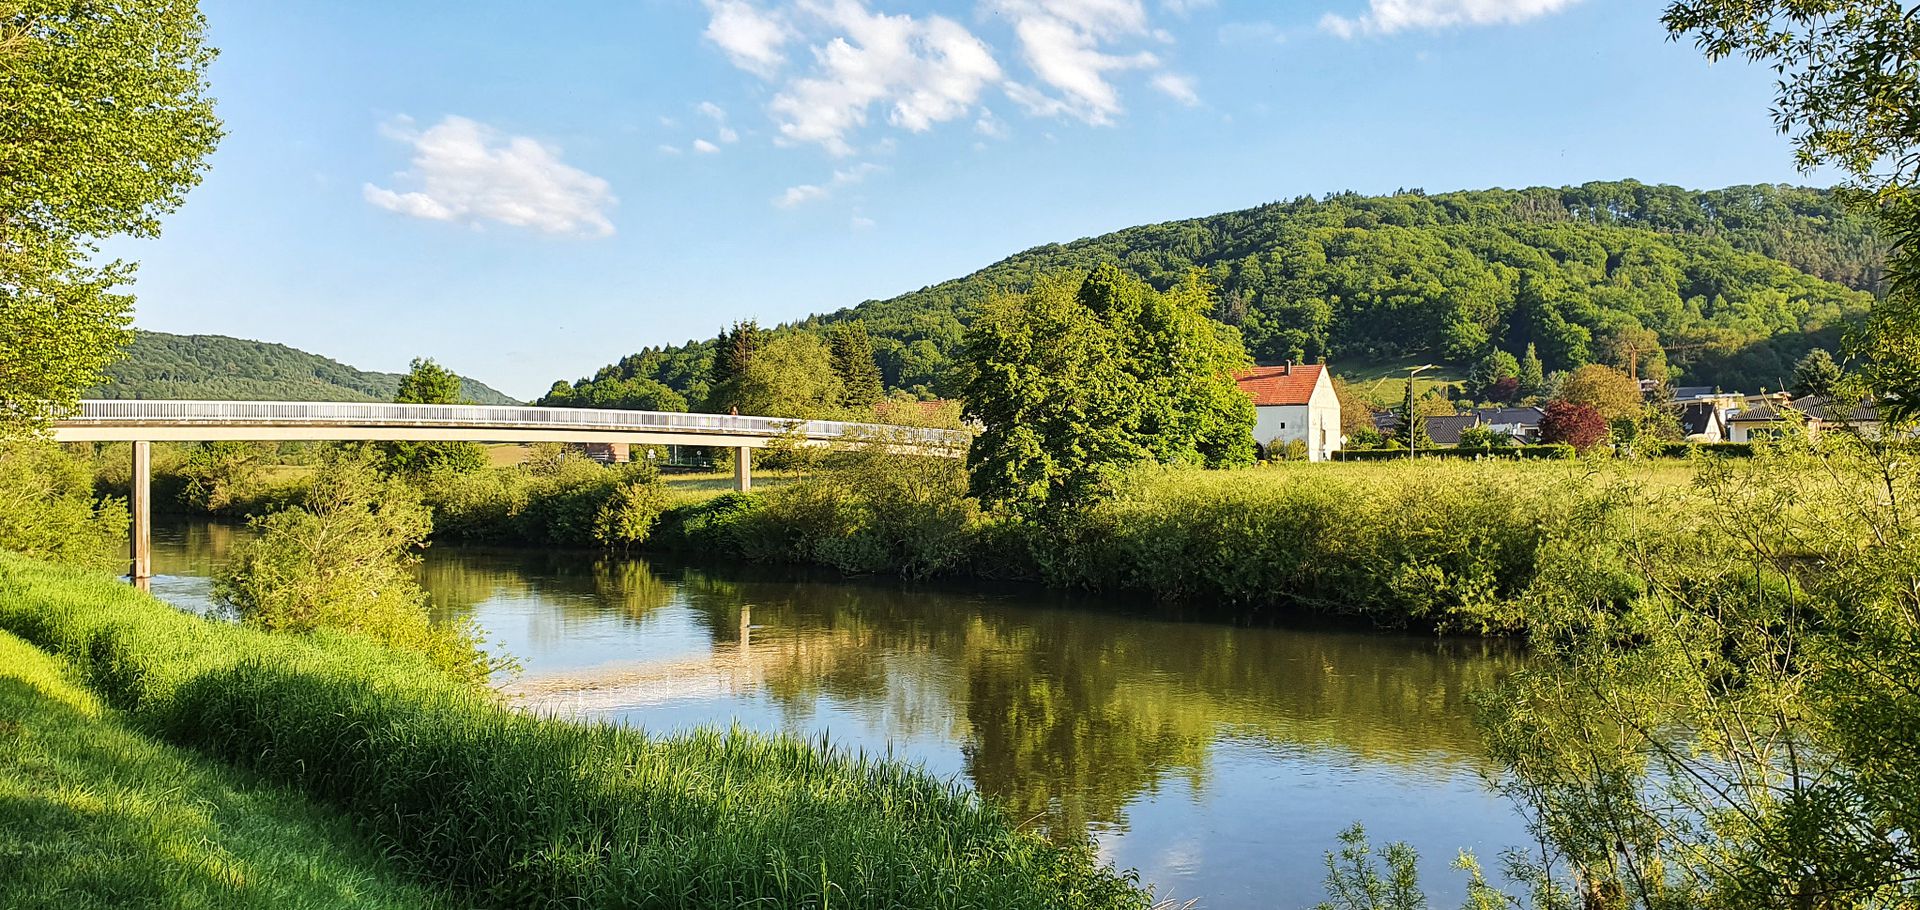 2nd of June 2021. Sauer river and Folkenbach.